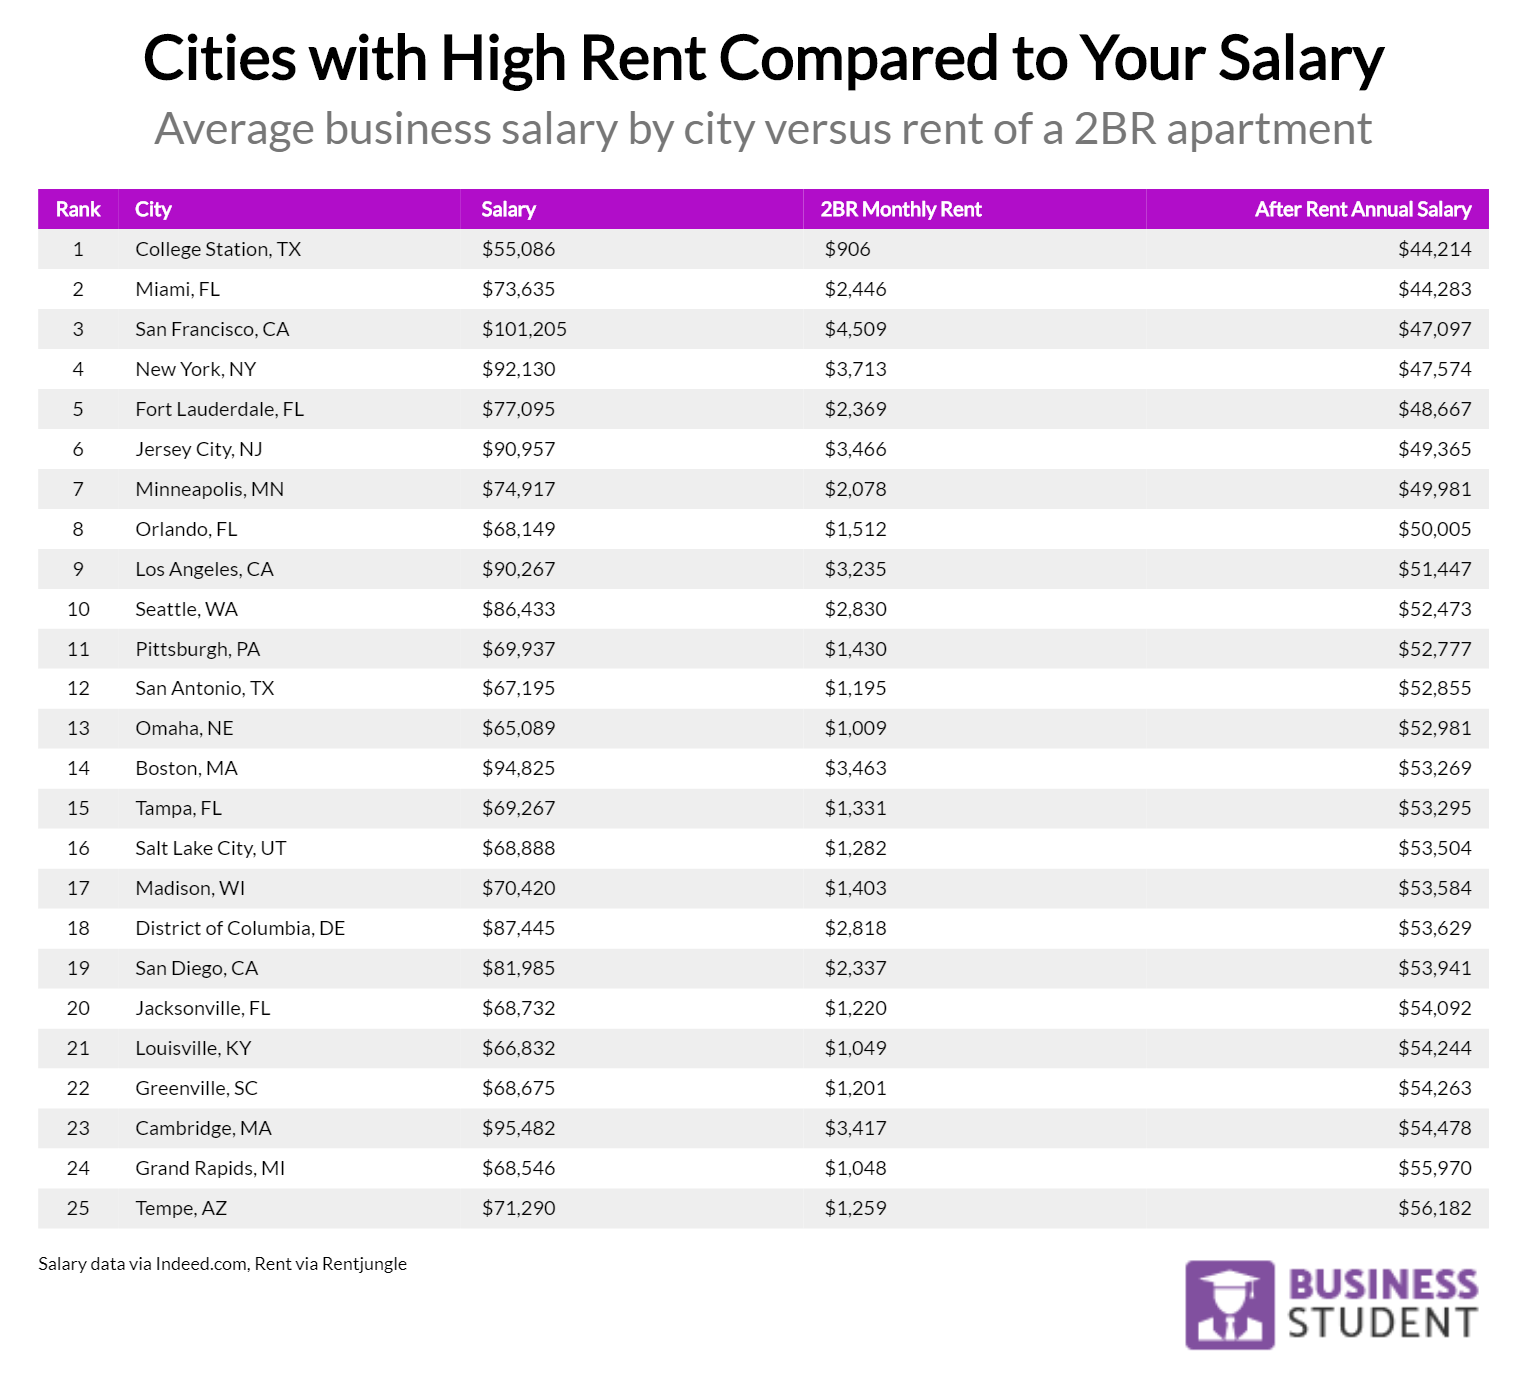 cities with high rent compared to your salary 2018 09 28T18 24 27.100Z